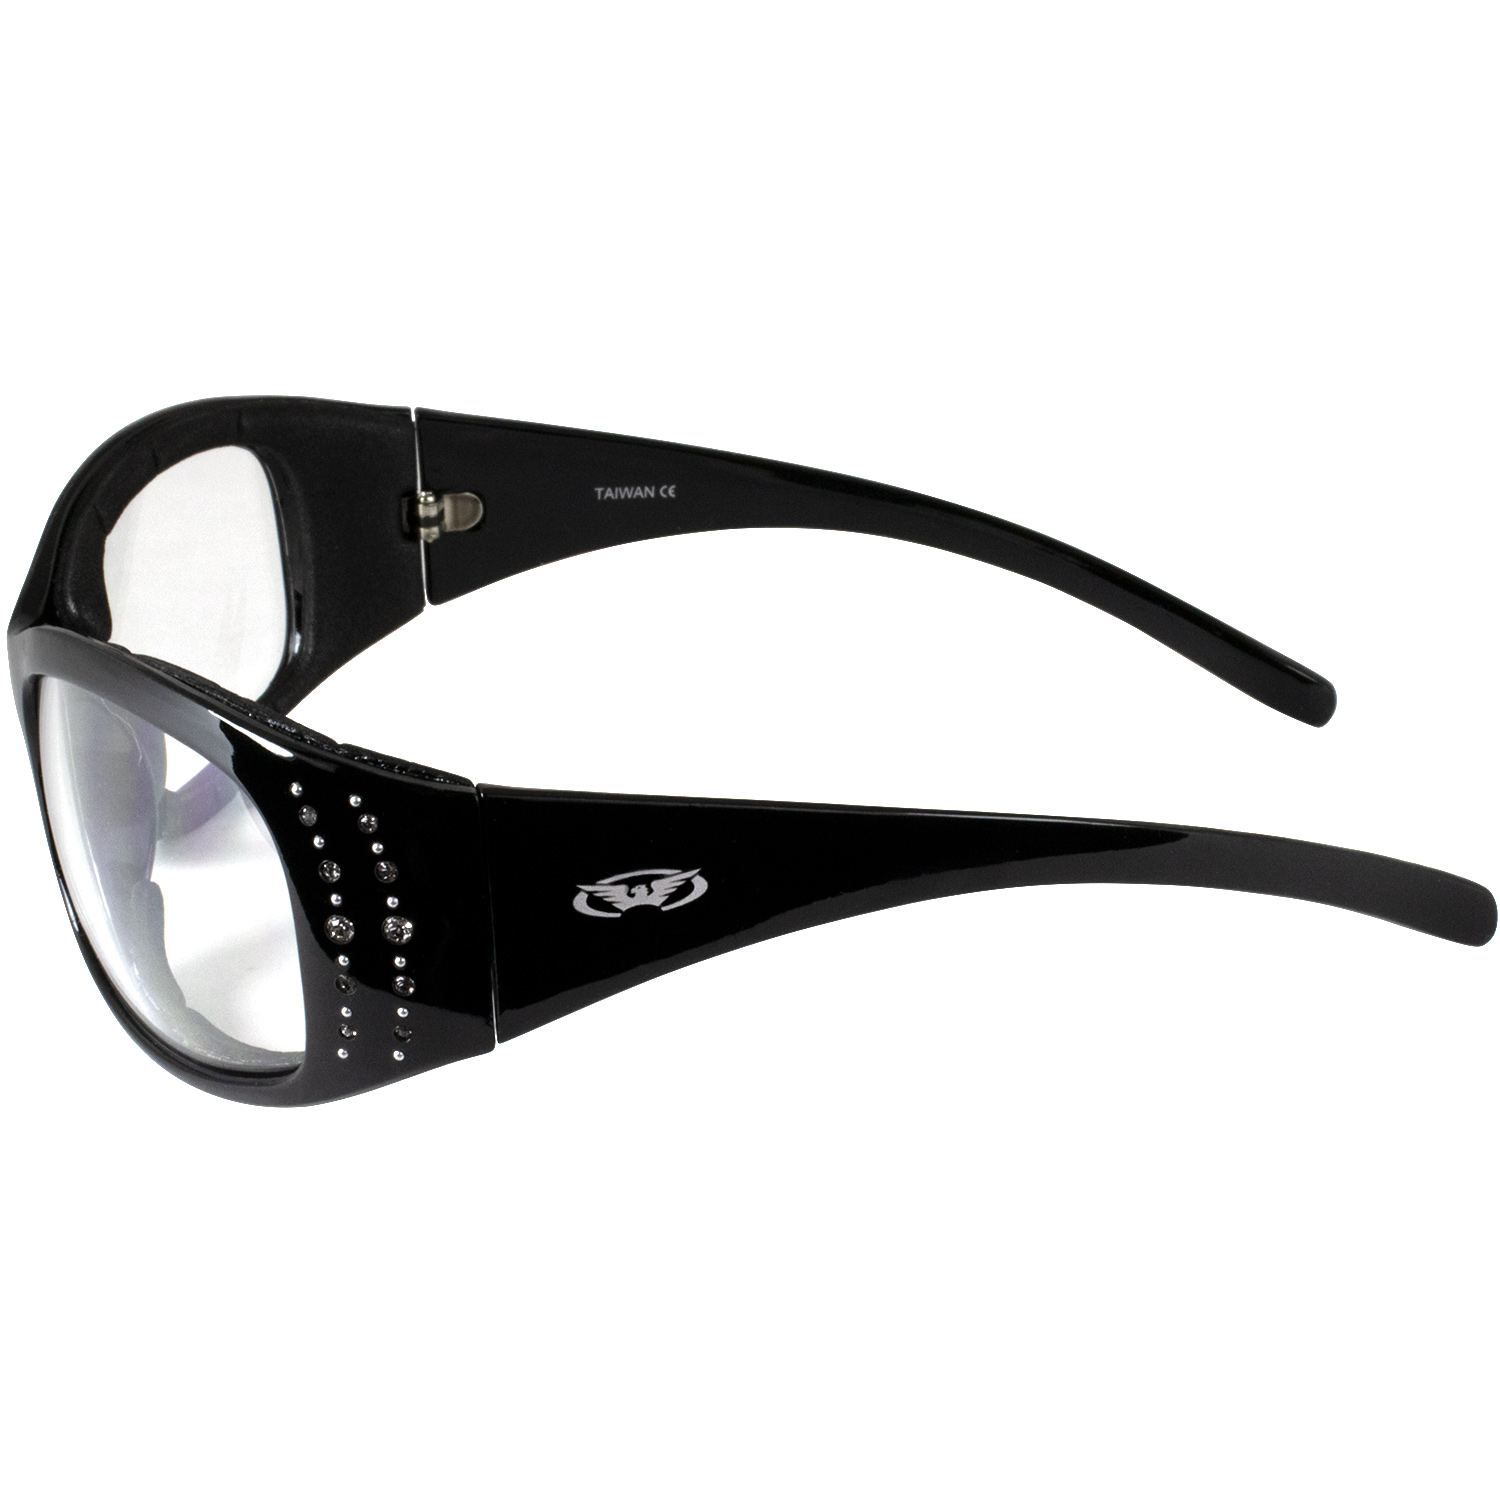 Global Vision Marilyn-2 Plus Motorcycle Riding Glasses for Women Sunglasses Black Padded Frames - image 3 of 7